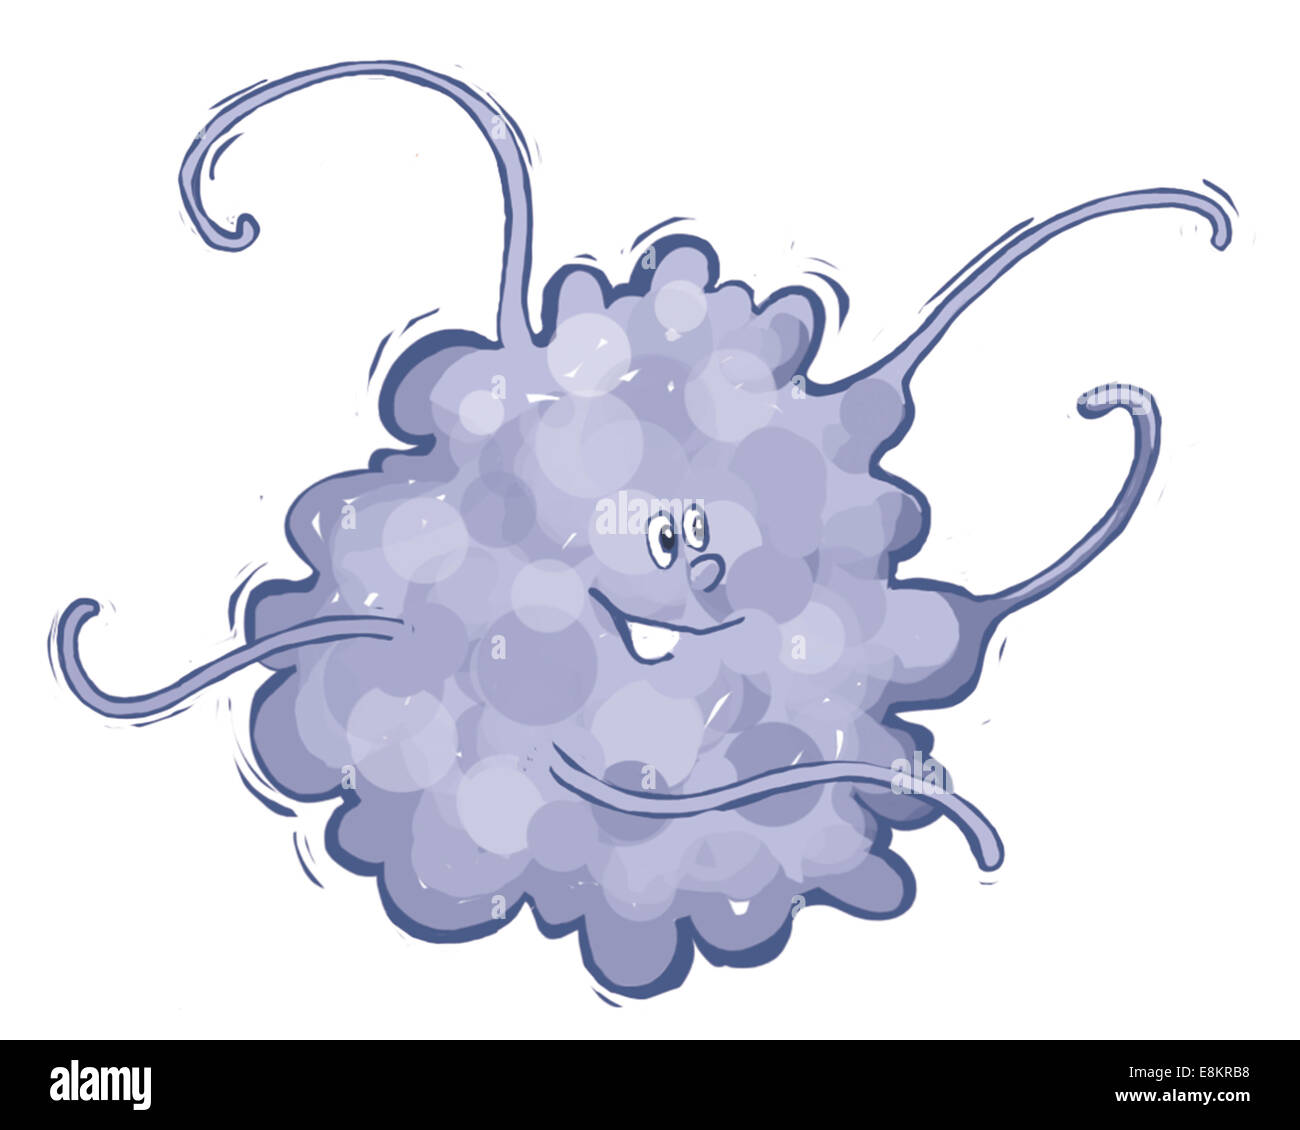 A macrophage character. Stock Photo